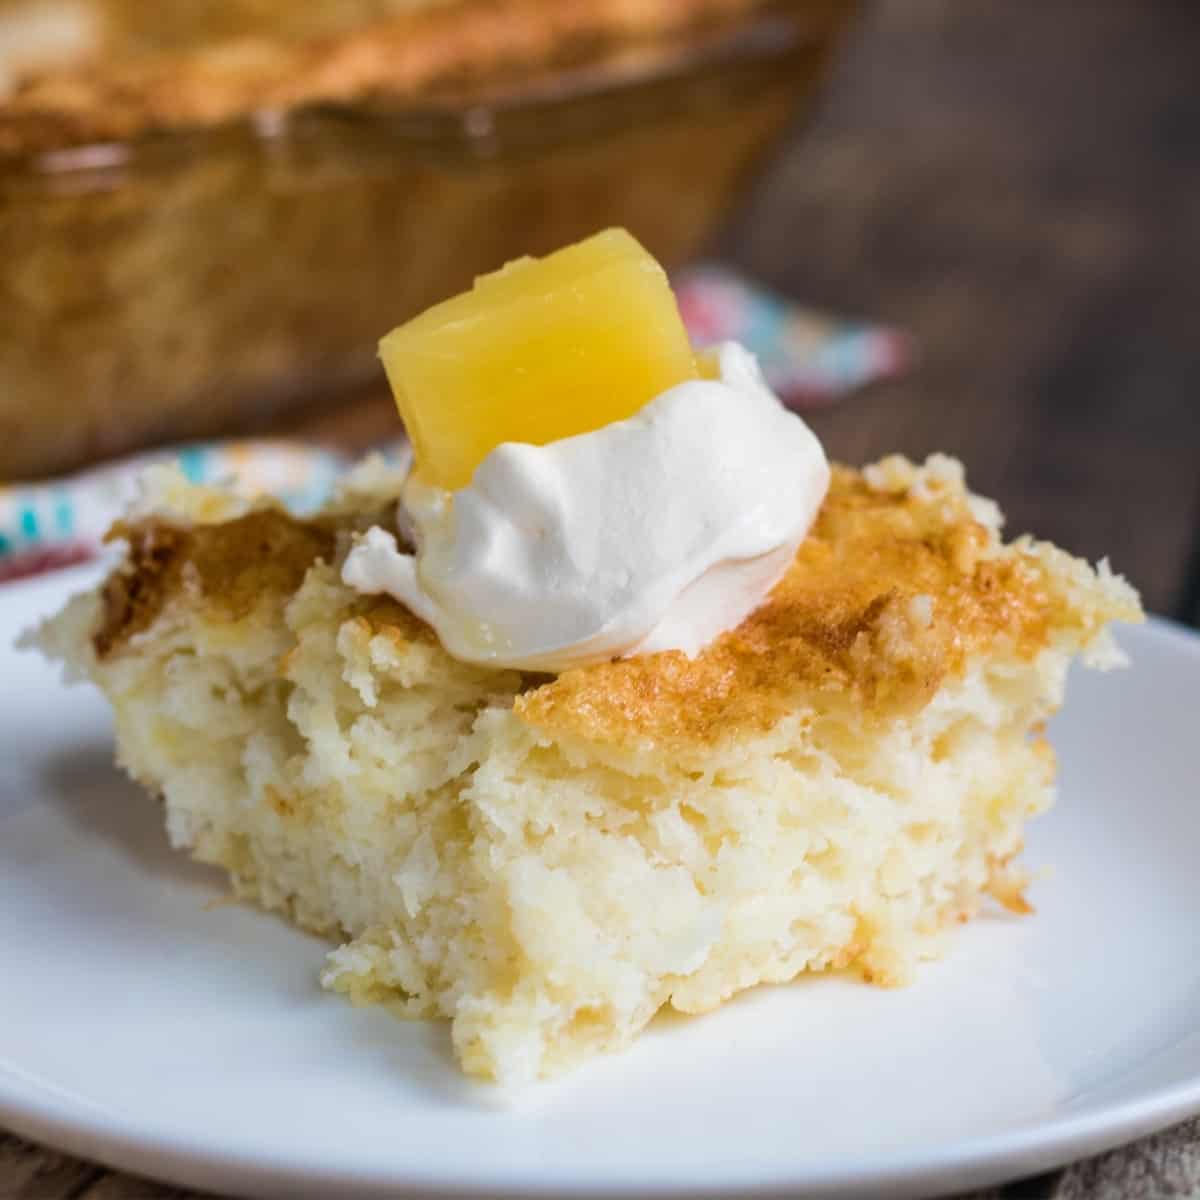 Pineapple Cake Recipe - Just 2 Ingredients - Passion For Savings